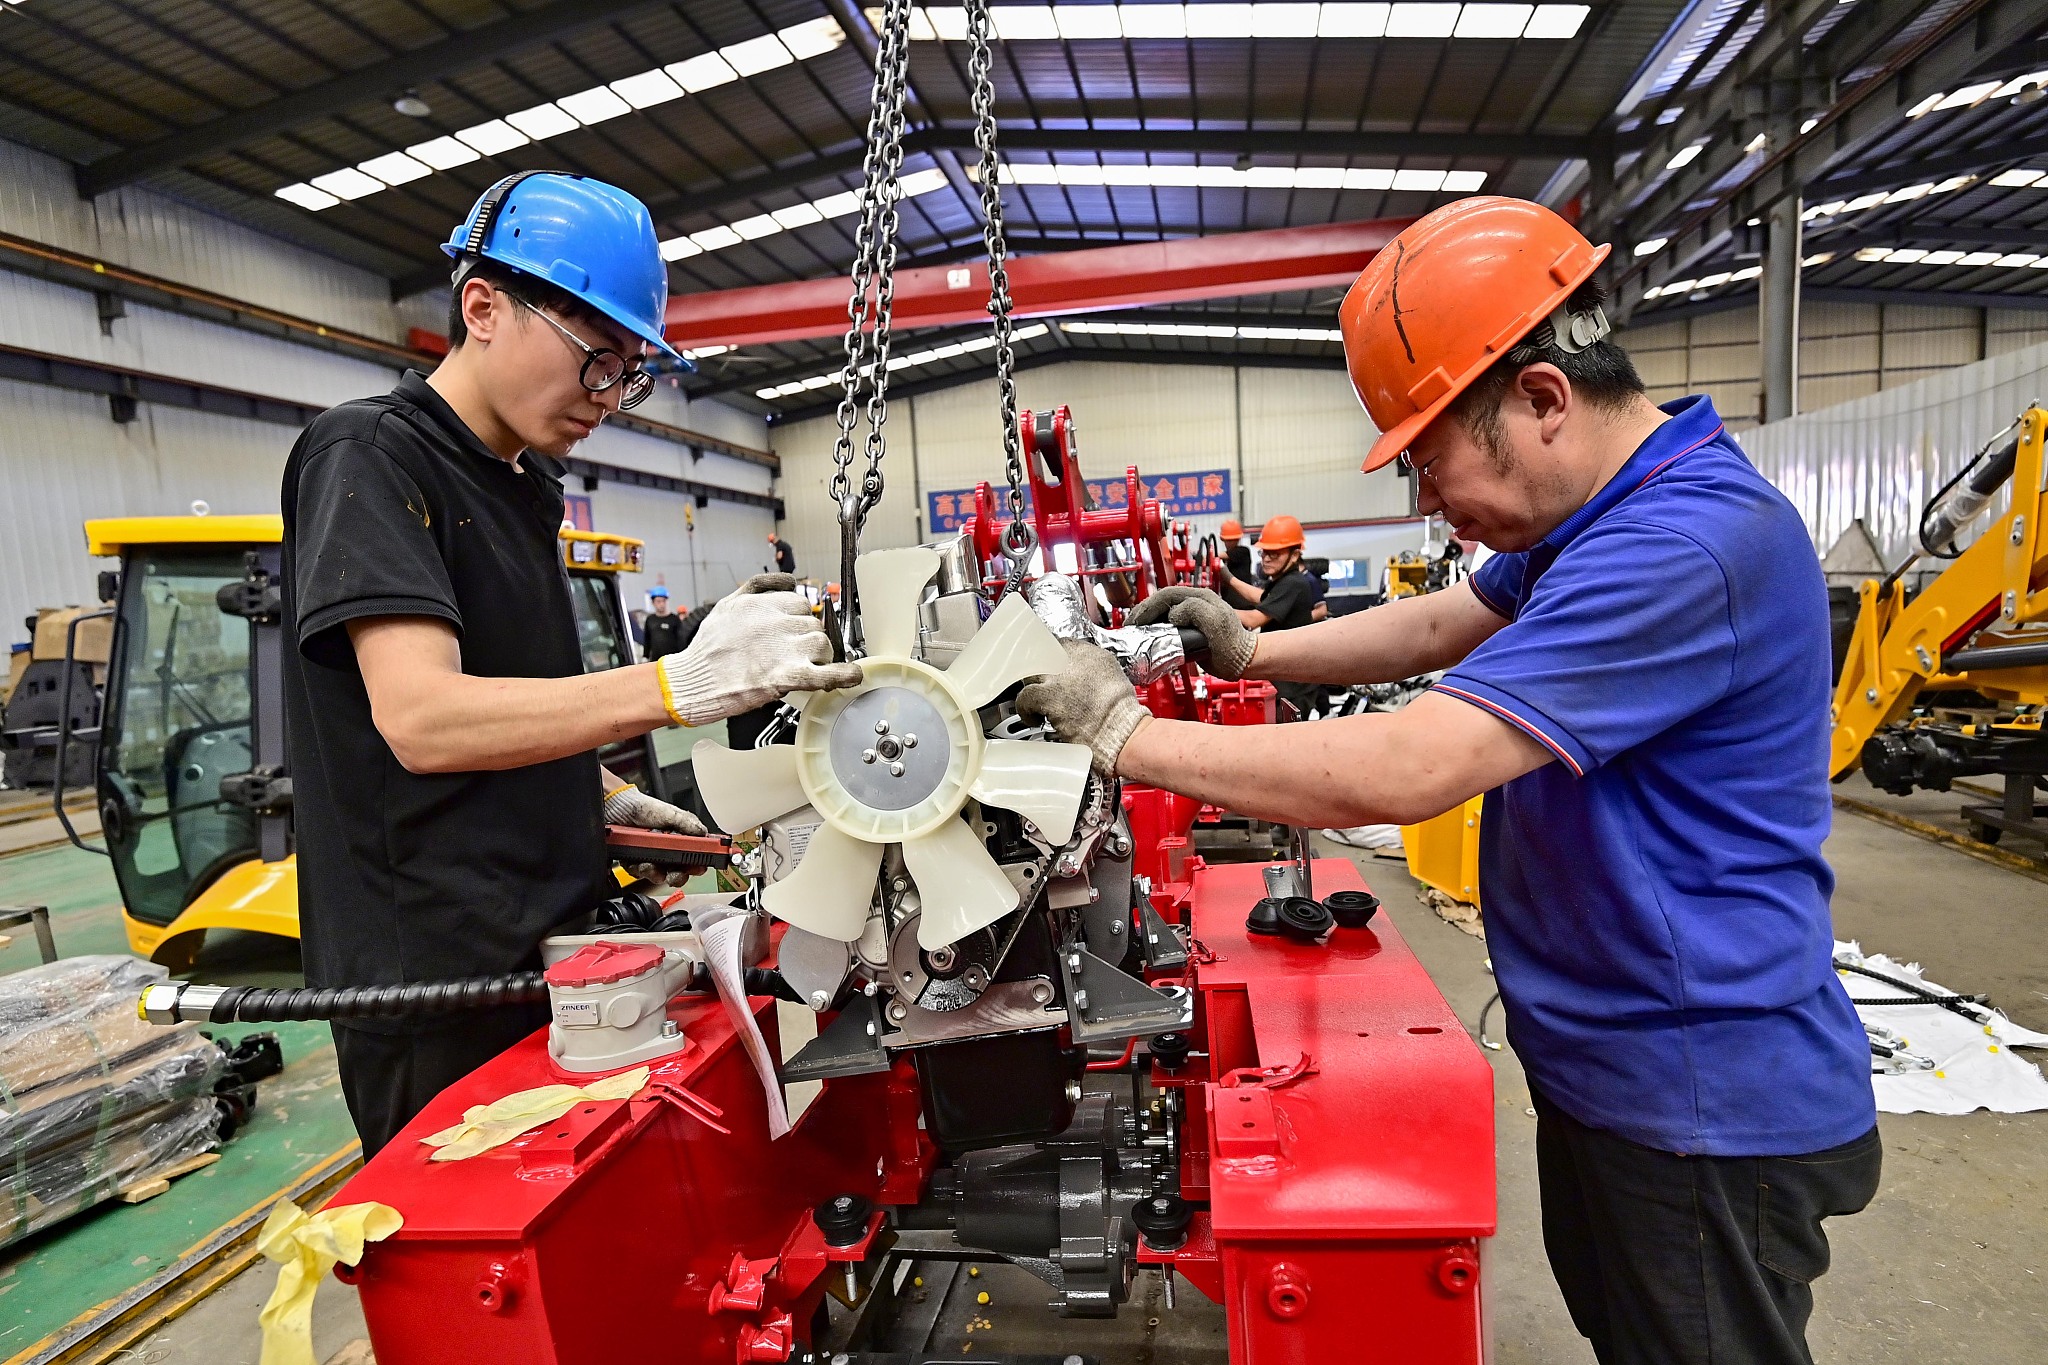 Workers assembled and produced at a factory of a loader manufacturing enterprise in Weifang, East China's Shandong Province on May 27. /CFP